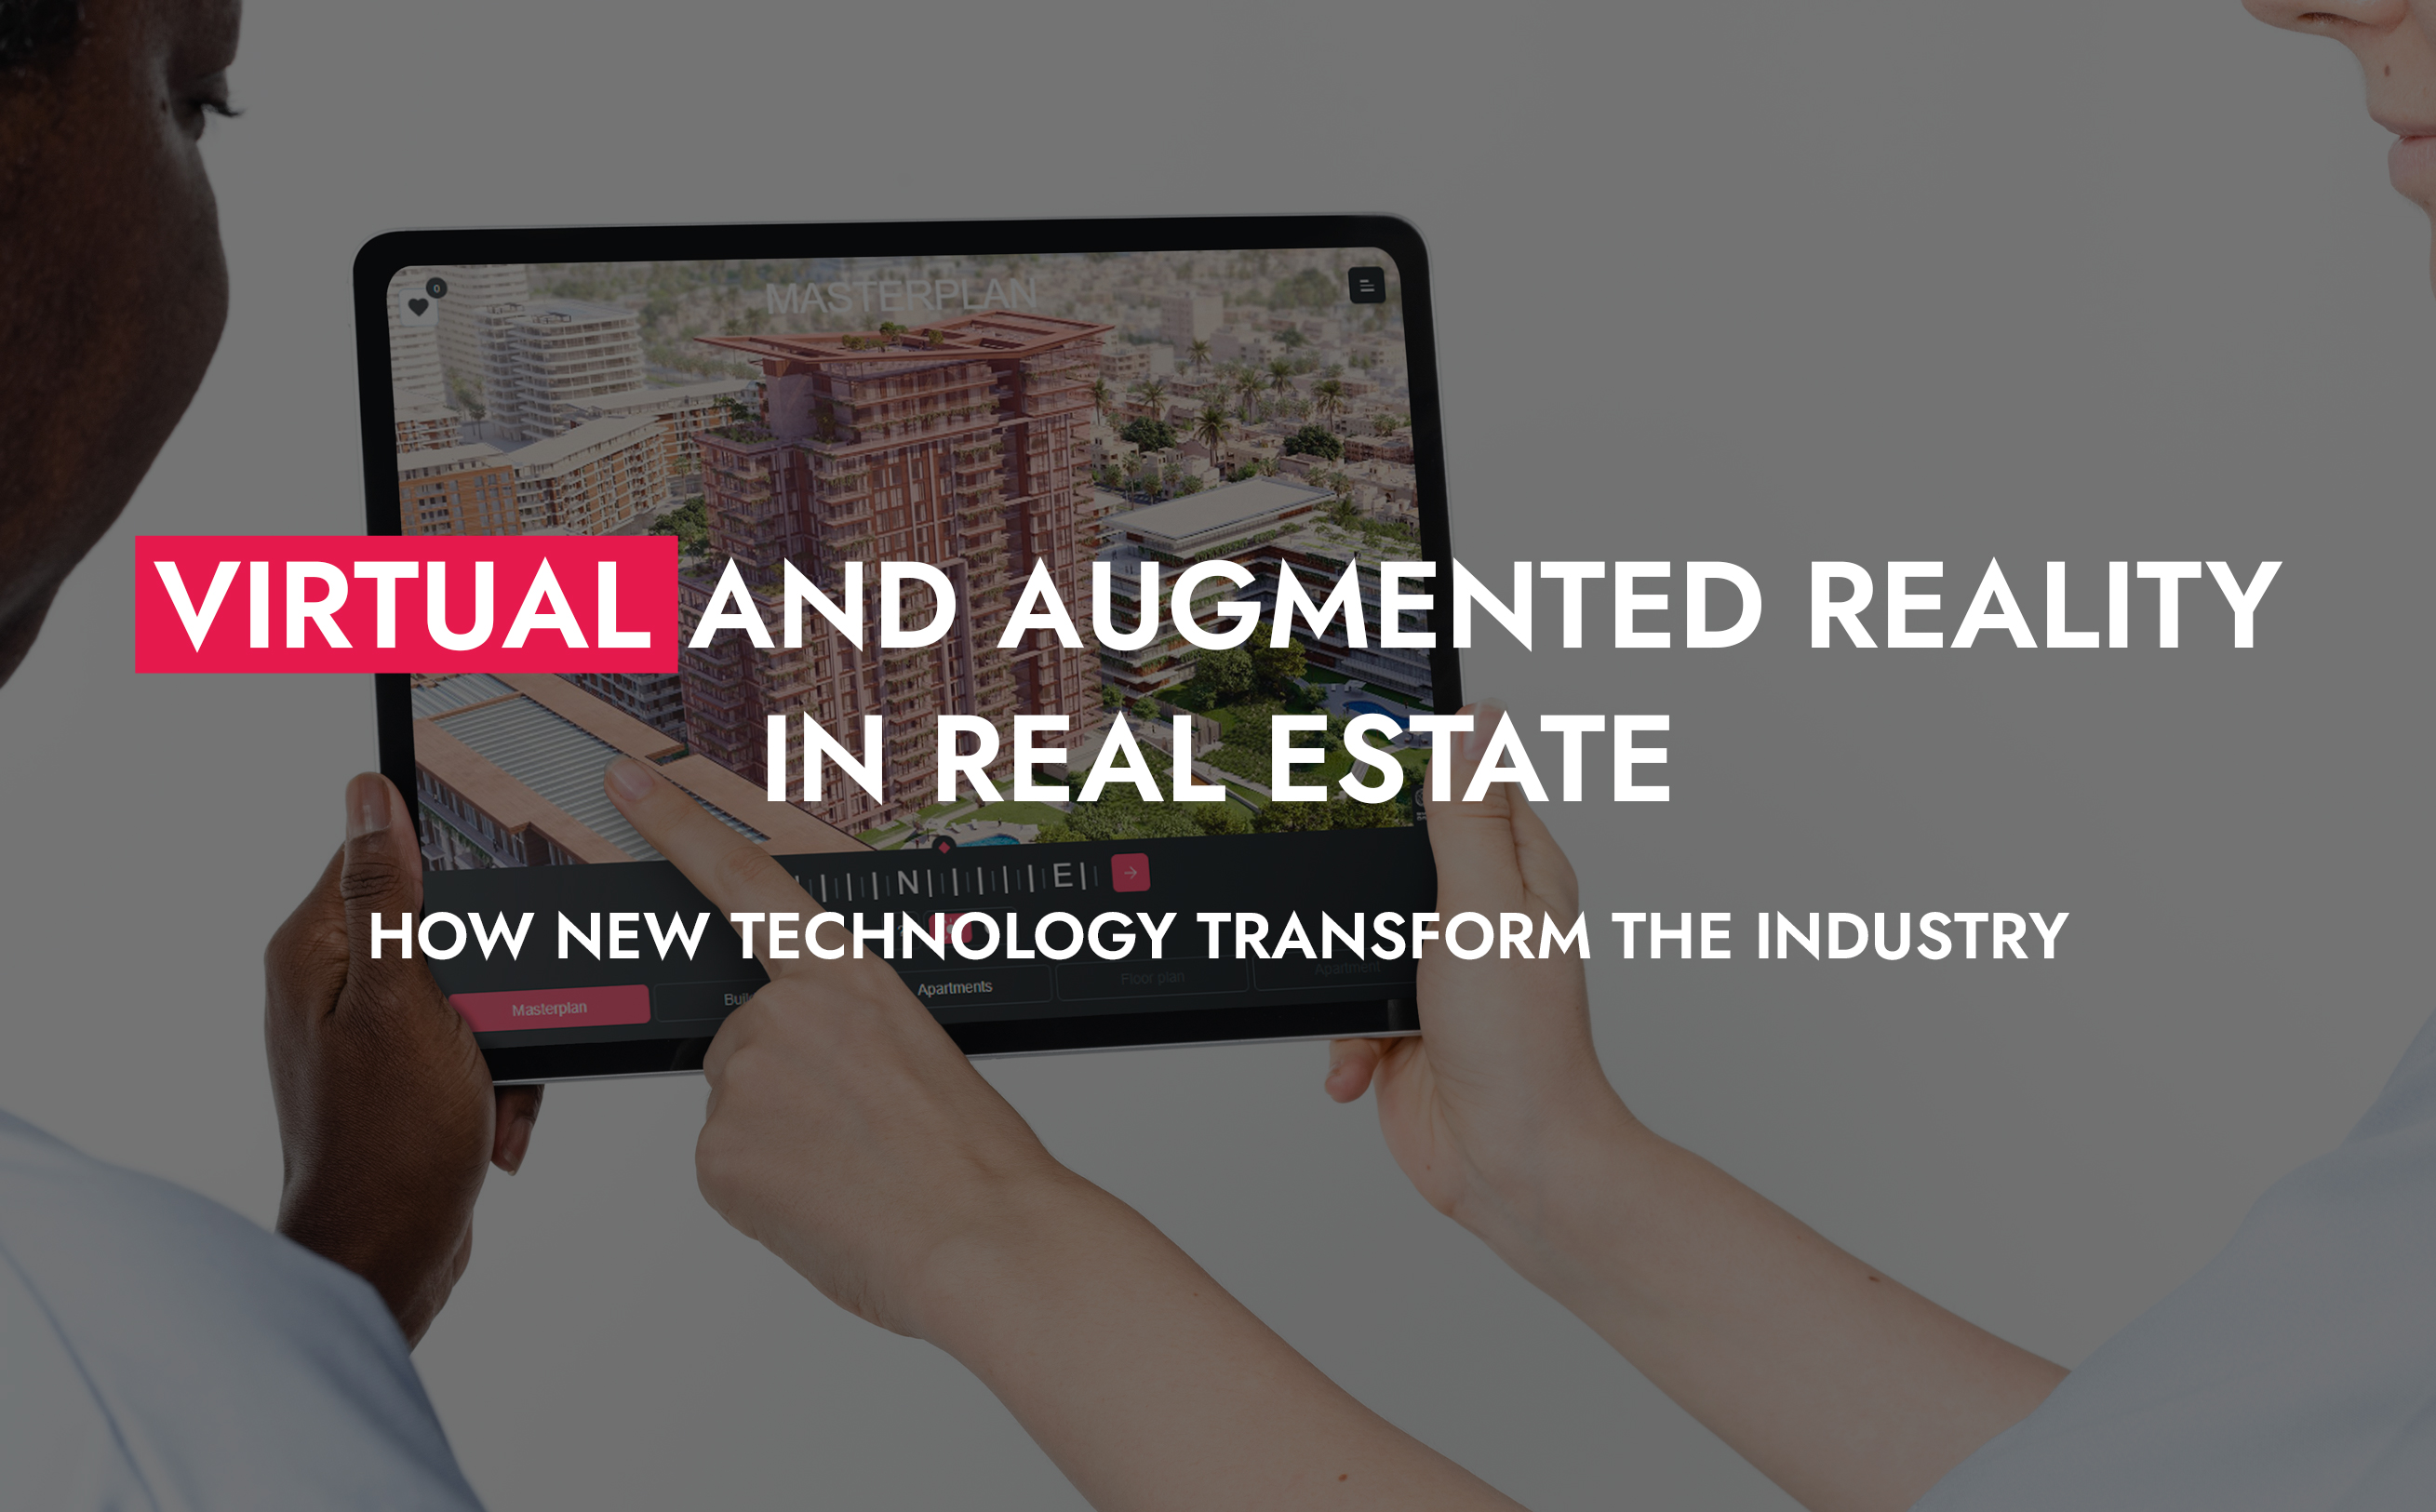 003 31 23 Virtual And Augmented Reality In Real Estate How New Technology